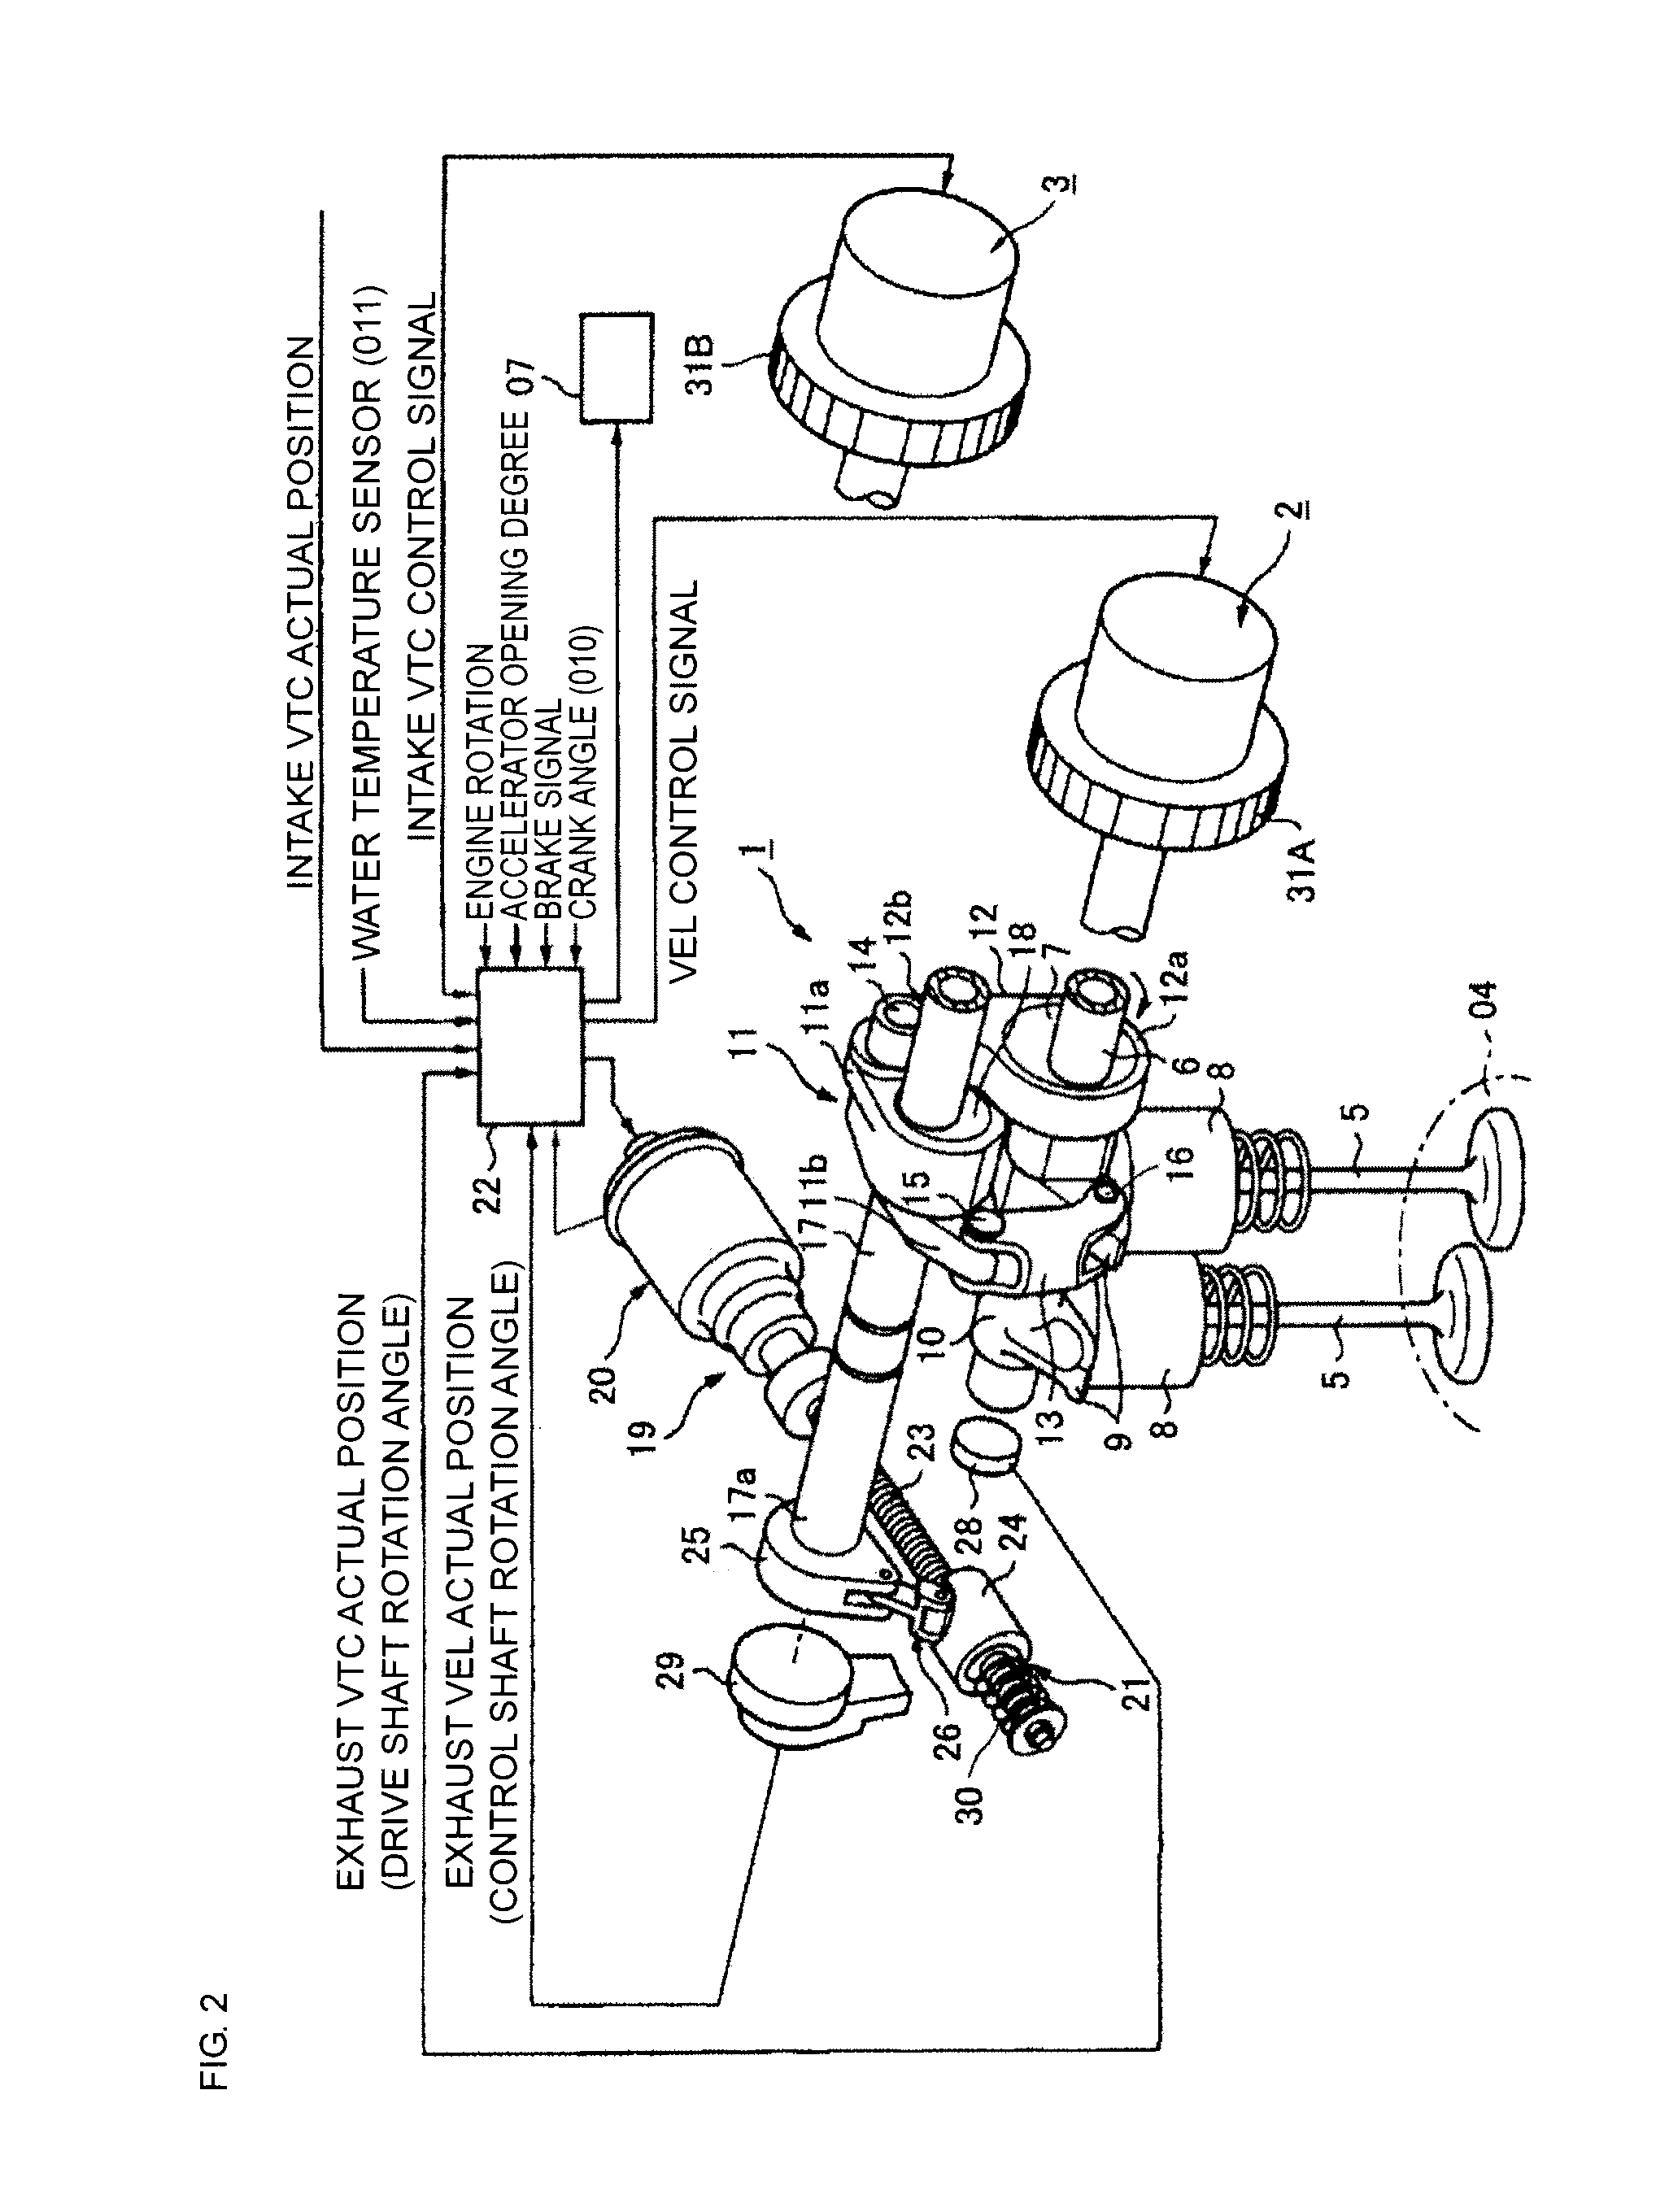 Automatic stop/restart control system for an internal combustion engine and variable valve actuating apparatus